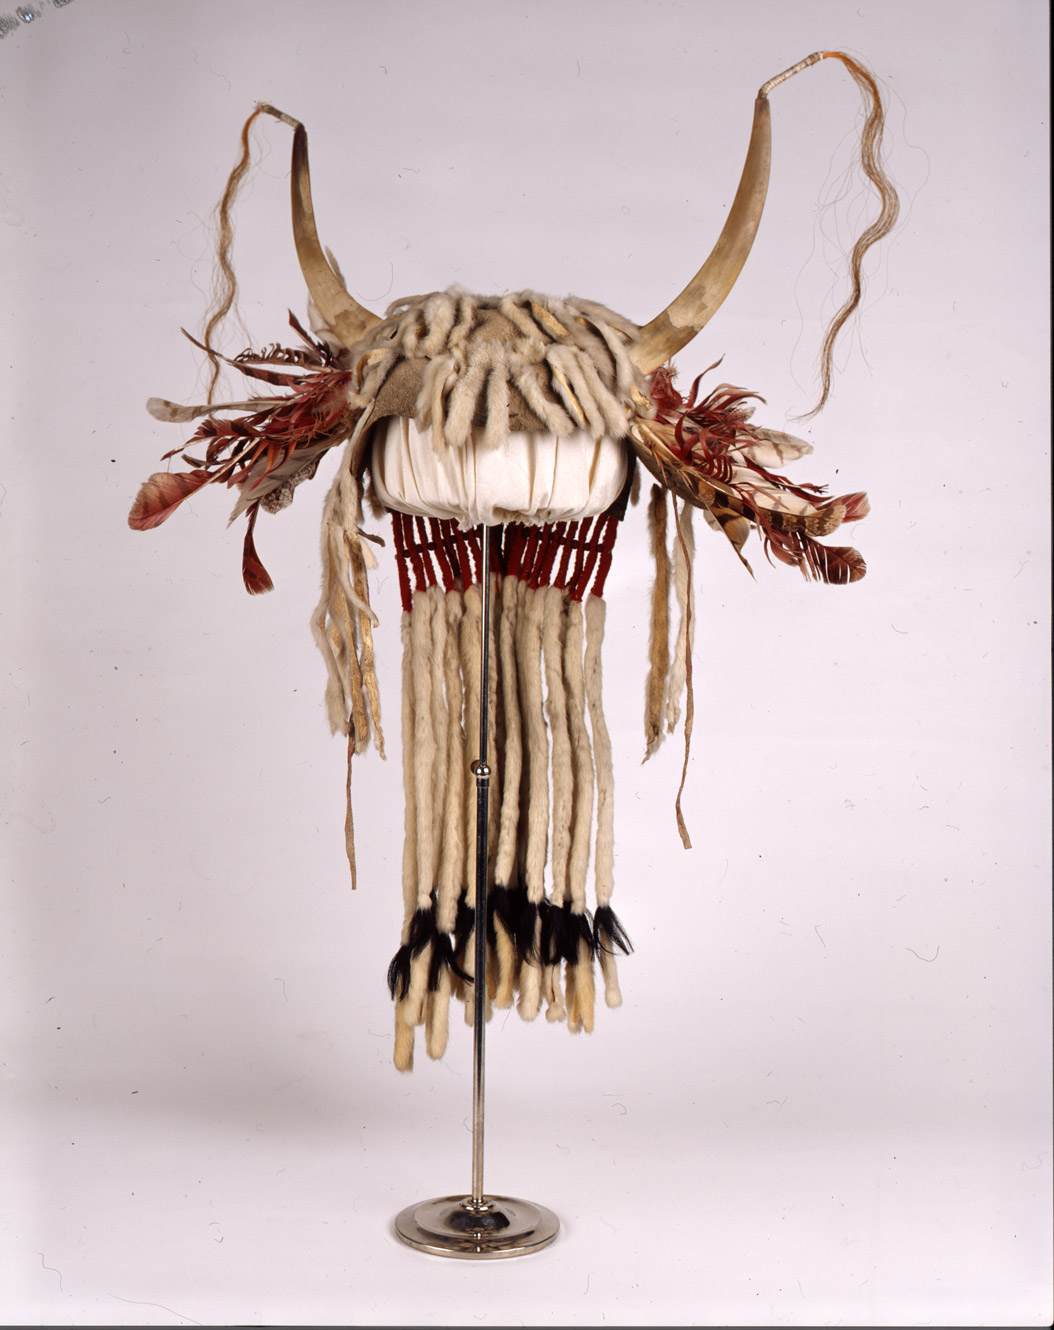 “Weasel Tail Headdress.”  This very special headdress was decorated with weasel tails.  It would have been worn for ceremonies.  This headdress was owned by Crazy Dog. SHSND Museum 00973